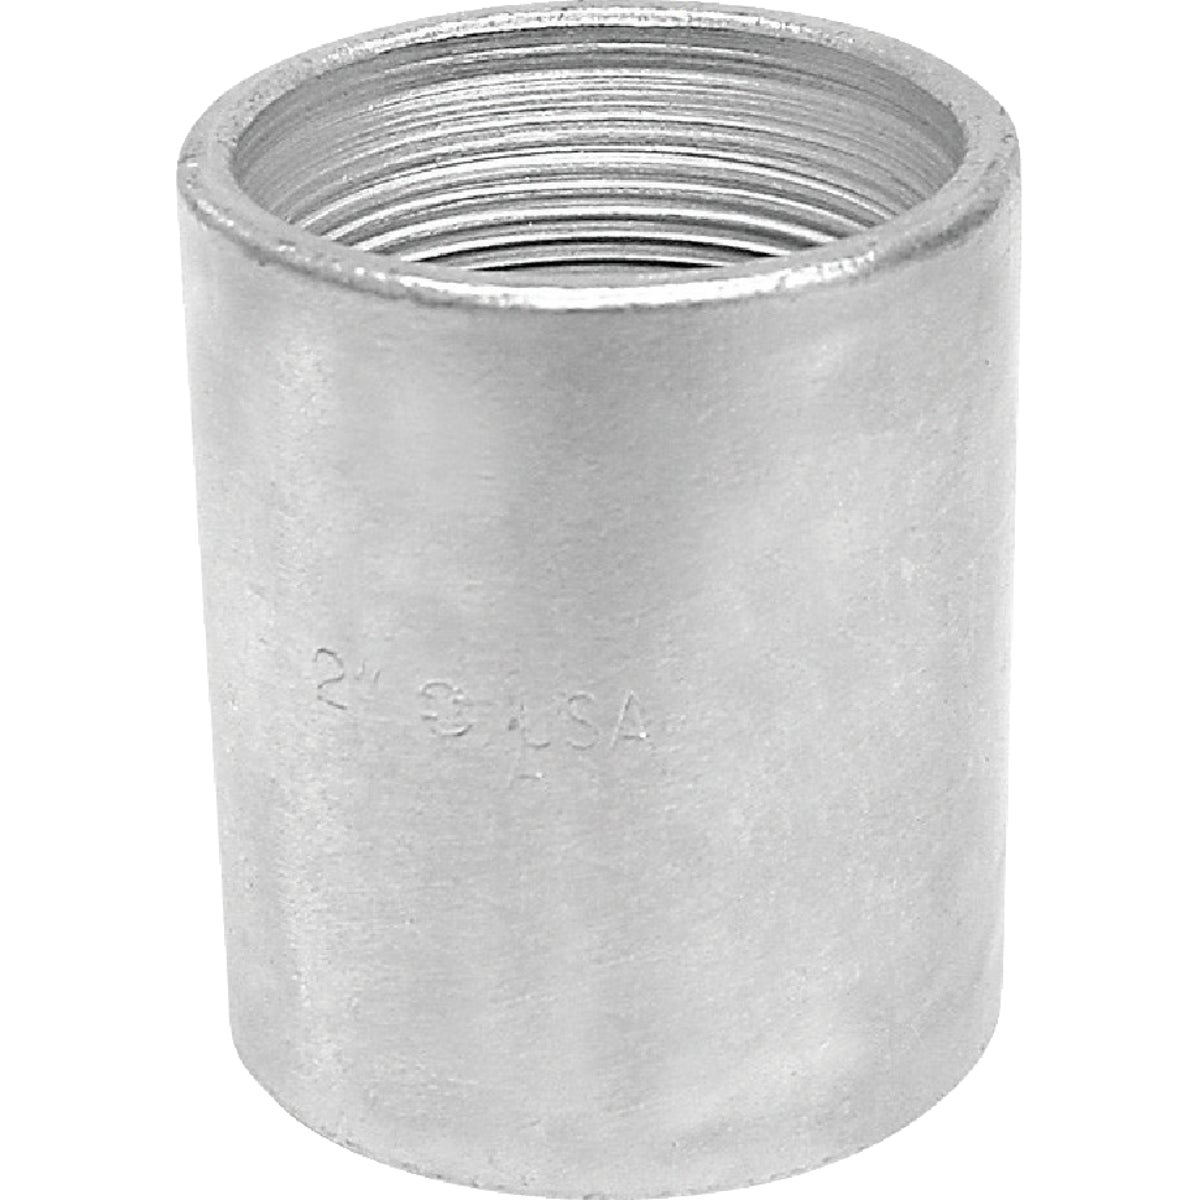 Southland 3/8 In. x 3/8 In. FPT Standard Merchant Galvanized Coupling